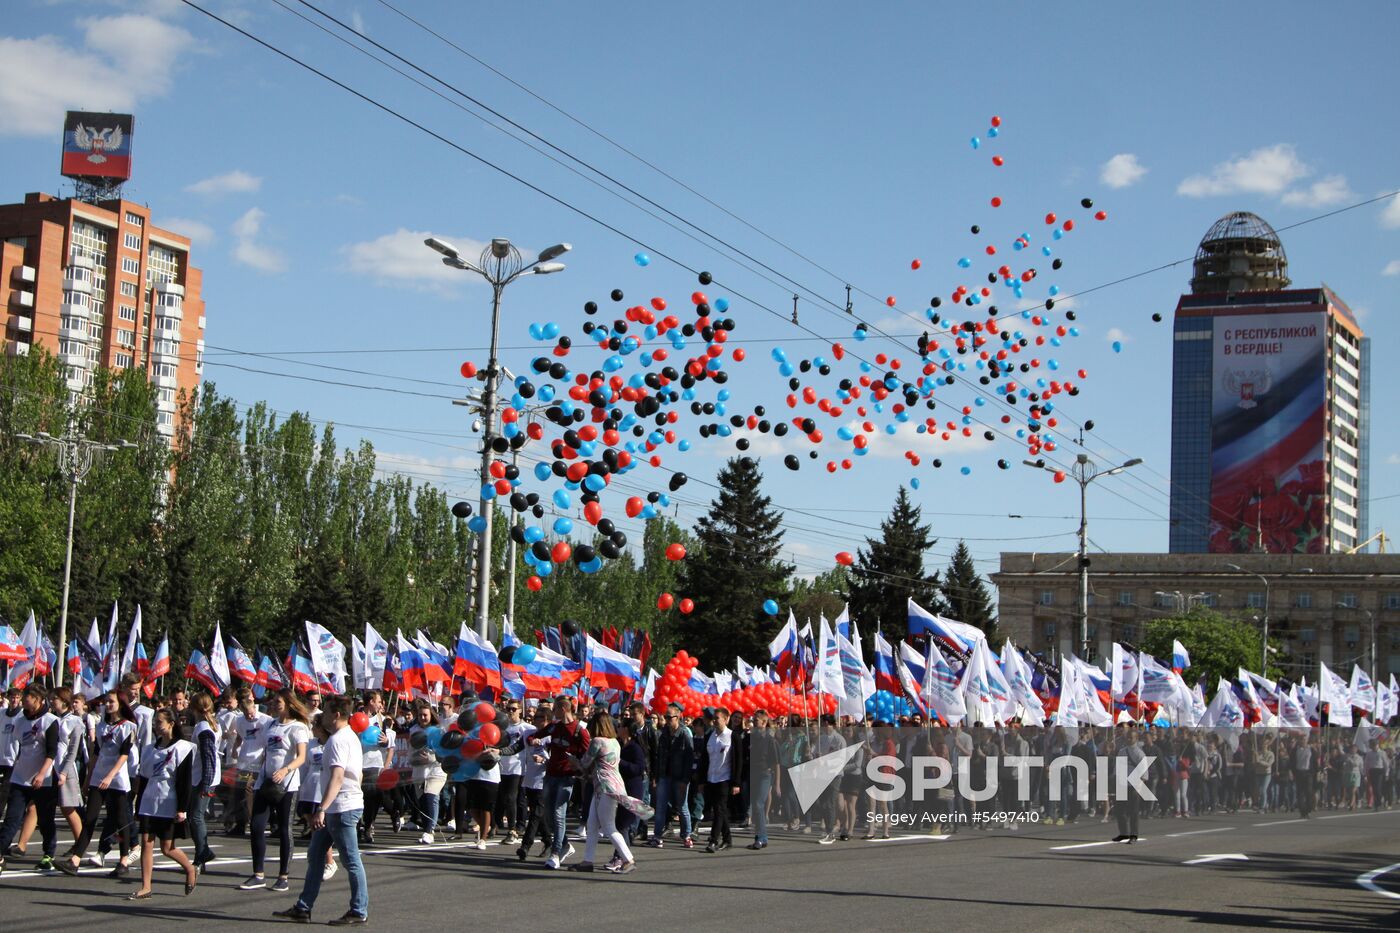 Celebration of the DPR's declaration of independence in Donetsk